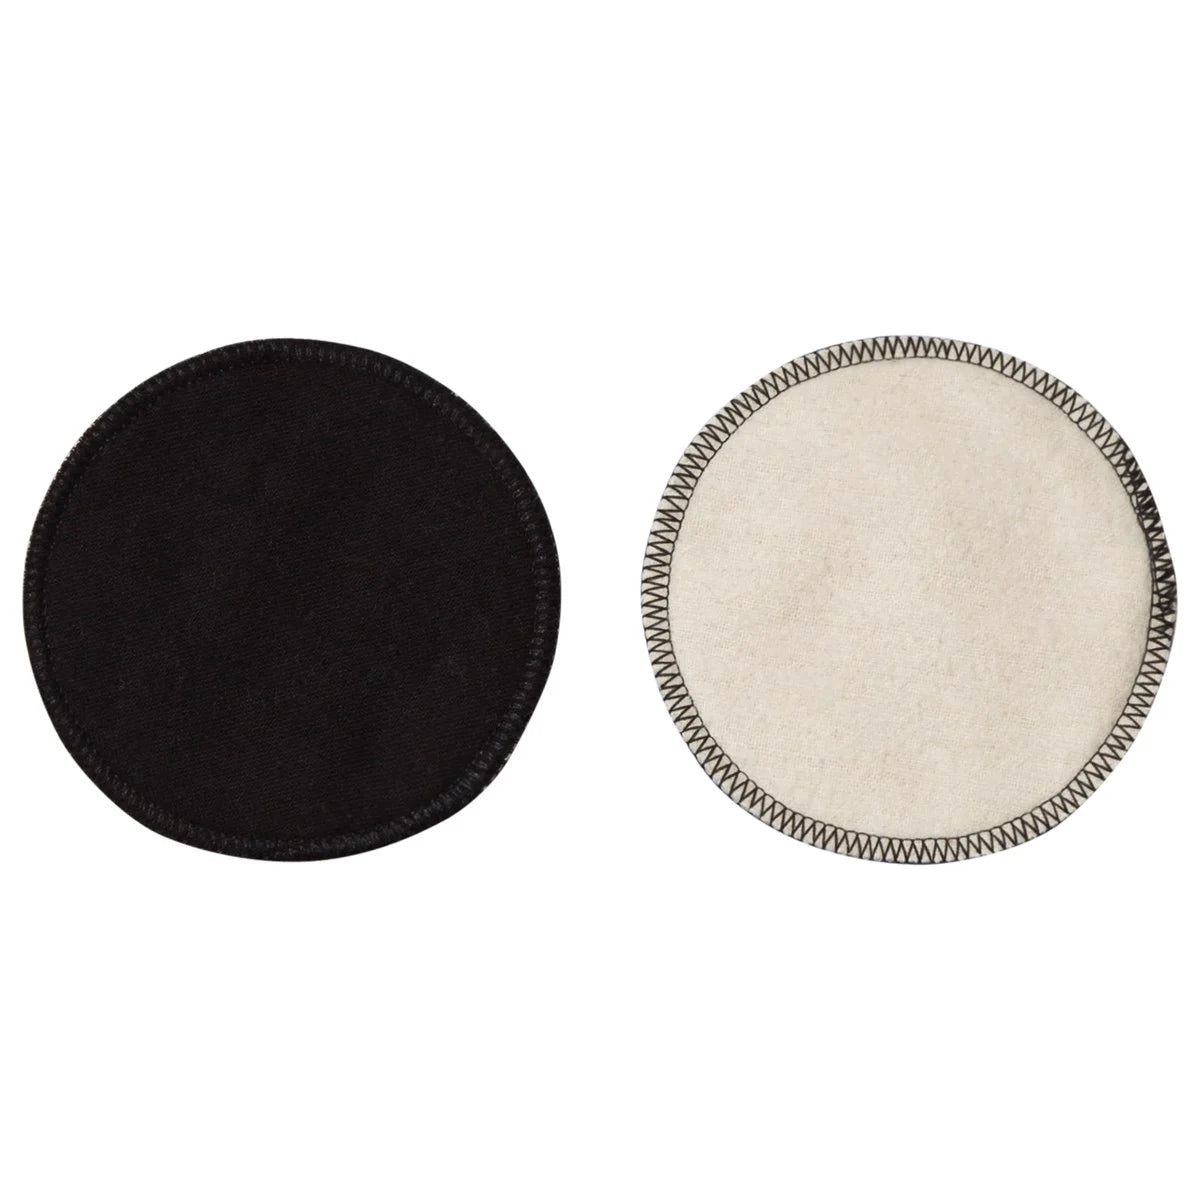 Carriwell - Washable Breast Pads (Black) -Pack of 6